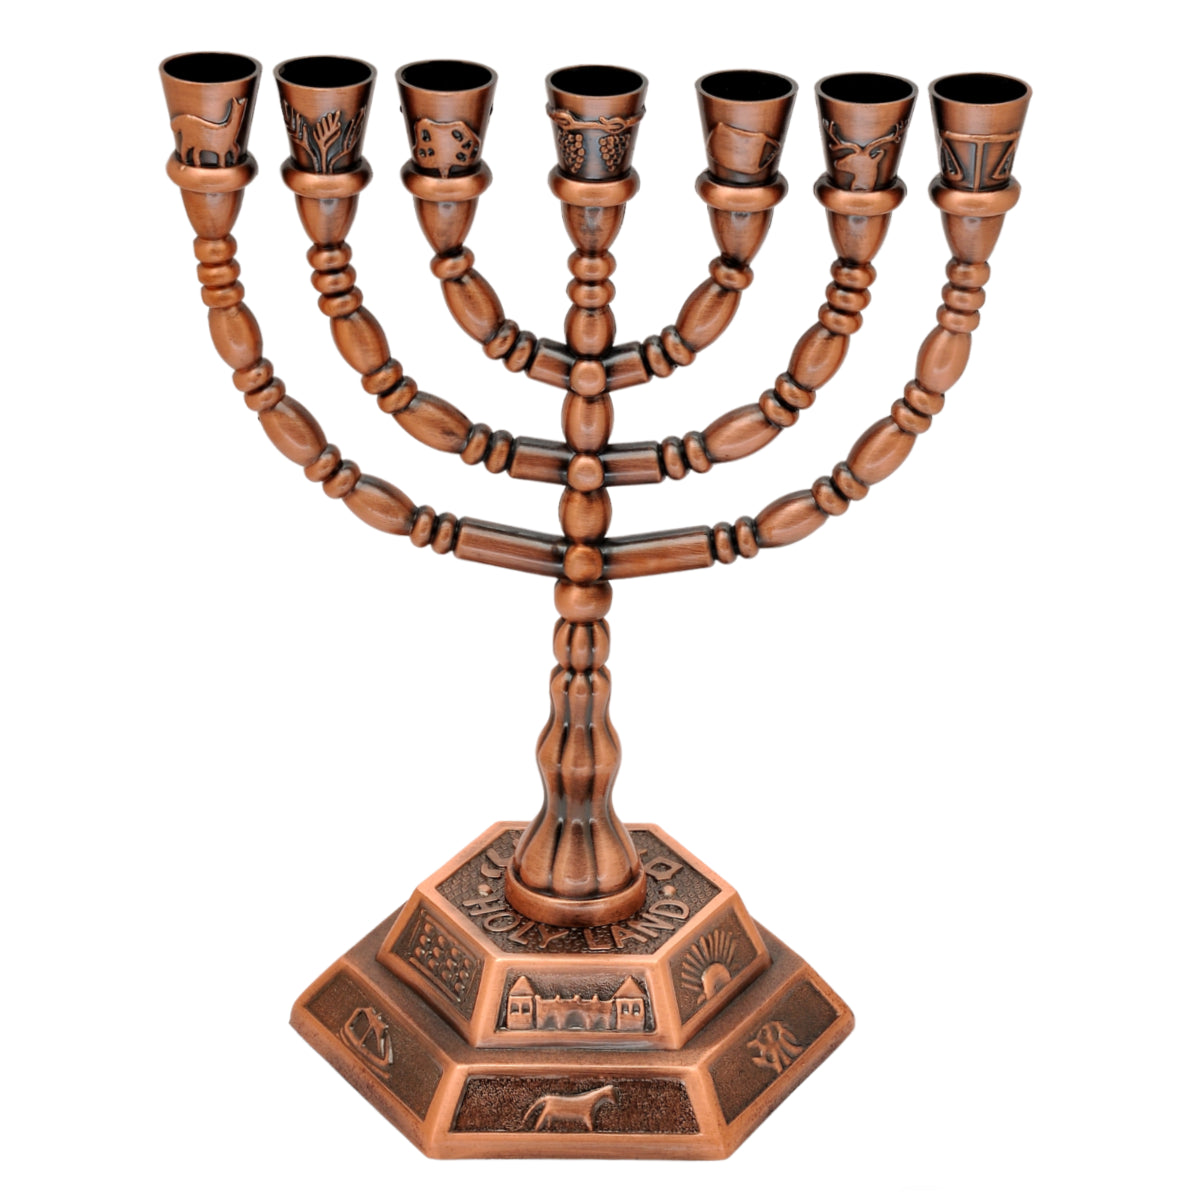 Temple Menorah 7 Branch Candle Holder 12 Tribes of Israel Hexagonal Base